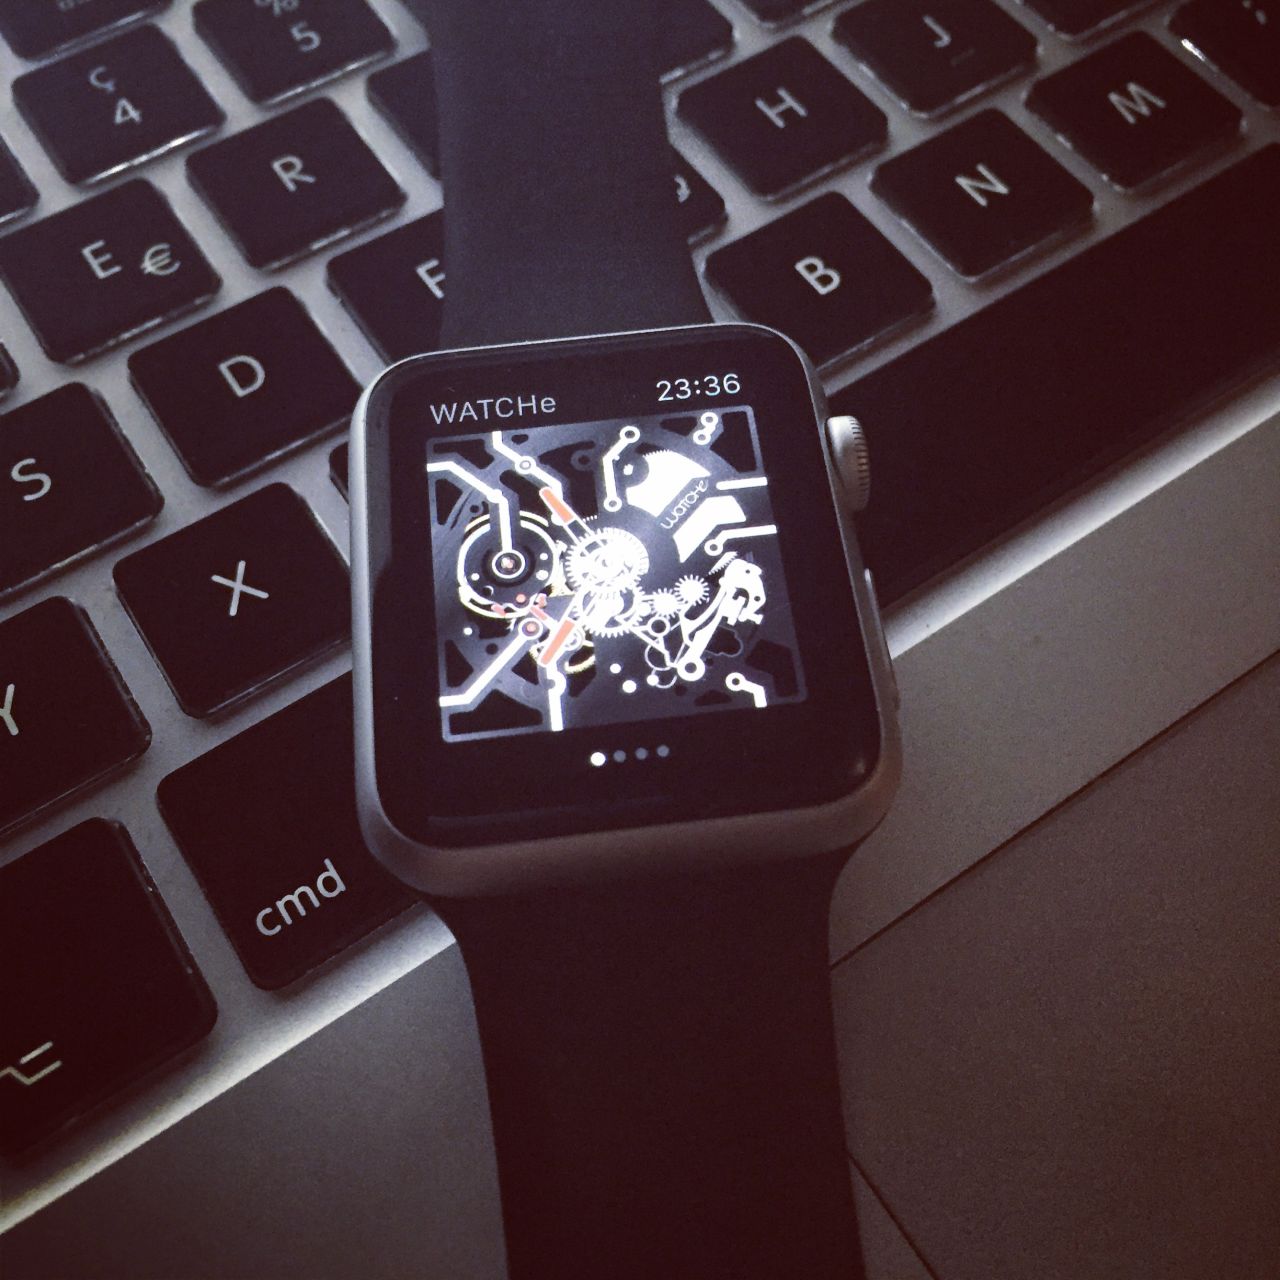 WatchE's application for the Apple Watch